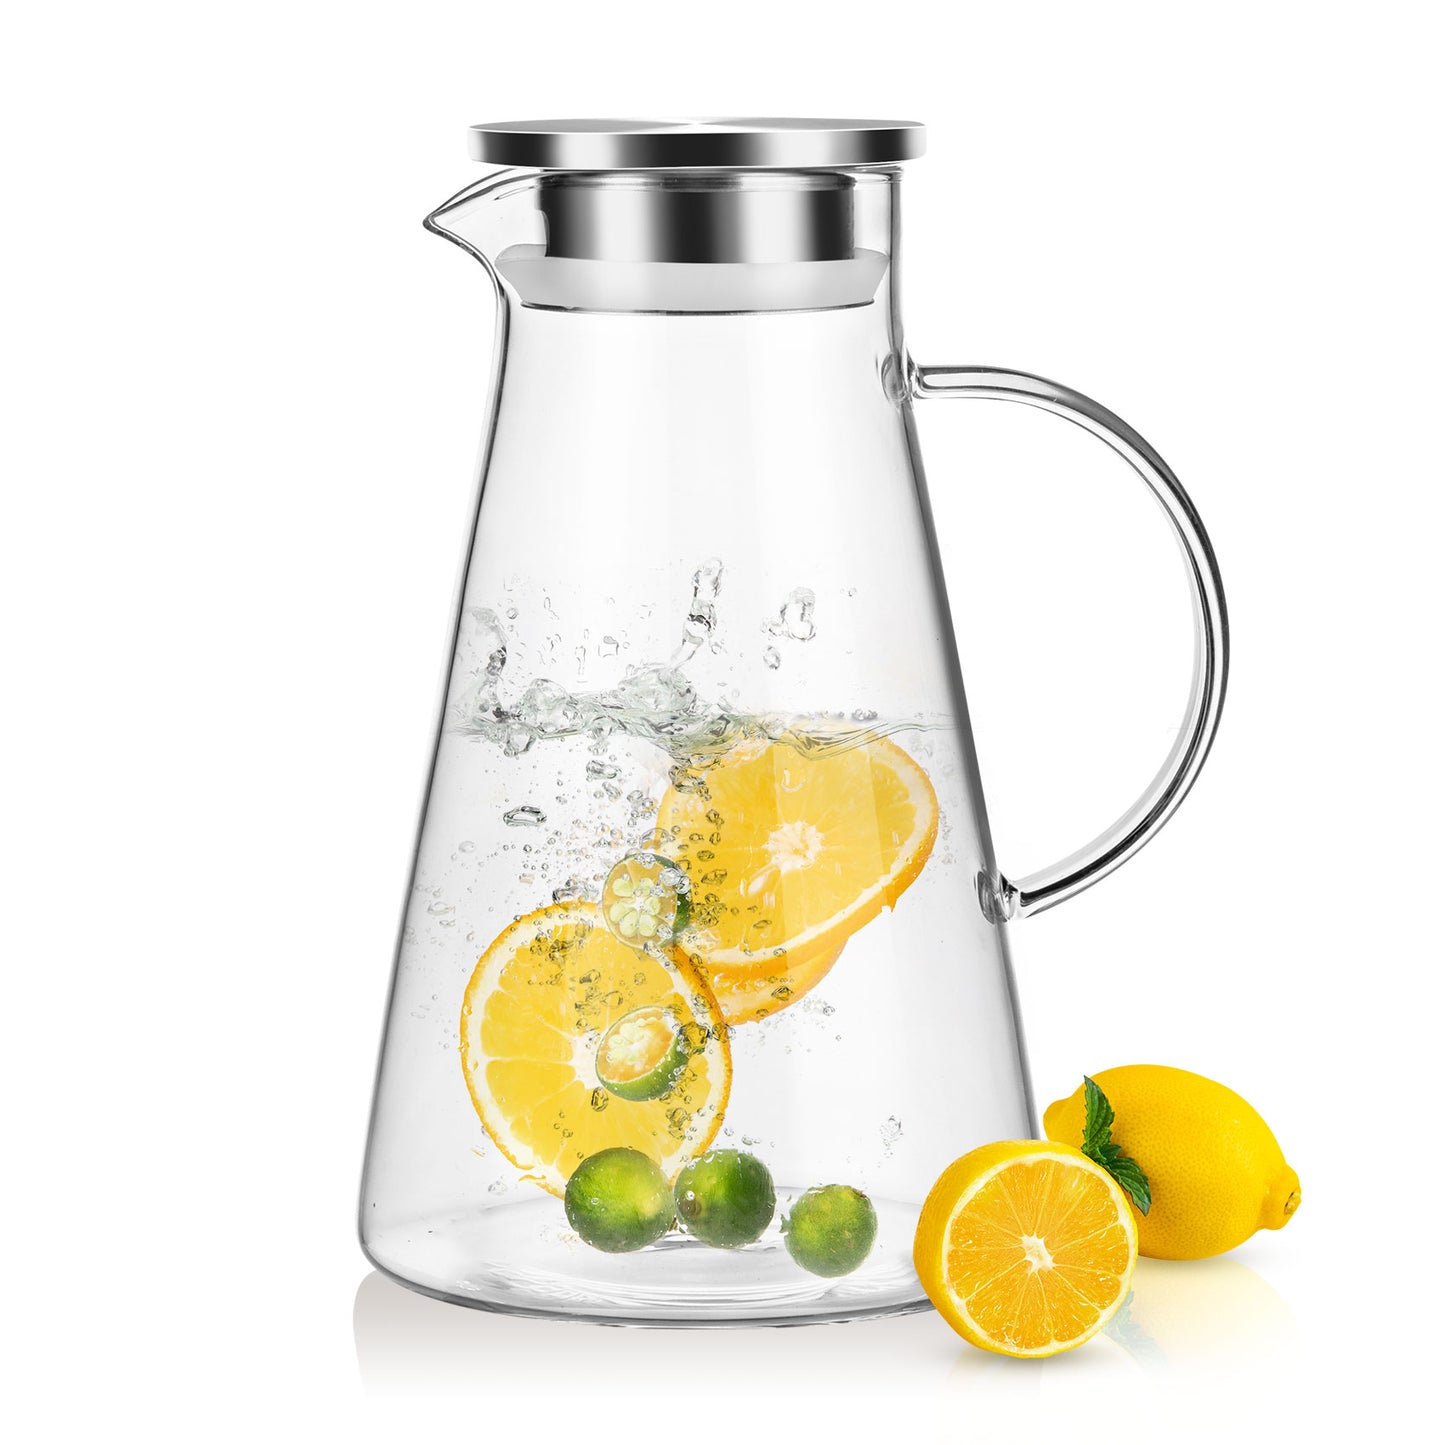 Bunhut Glass Pitcher with Lid,68 Ounces Water Pitcher for Hot Cold Drinks,Glass Water Jar with Heat-Resistant Handle,Large Beverage Pitcher,High